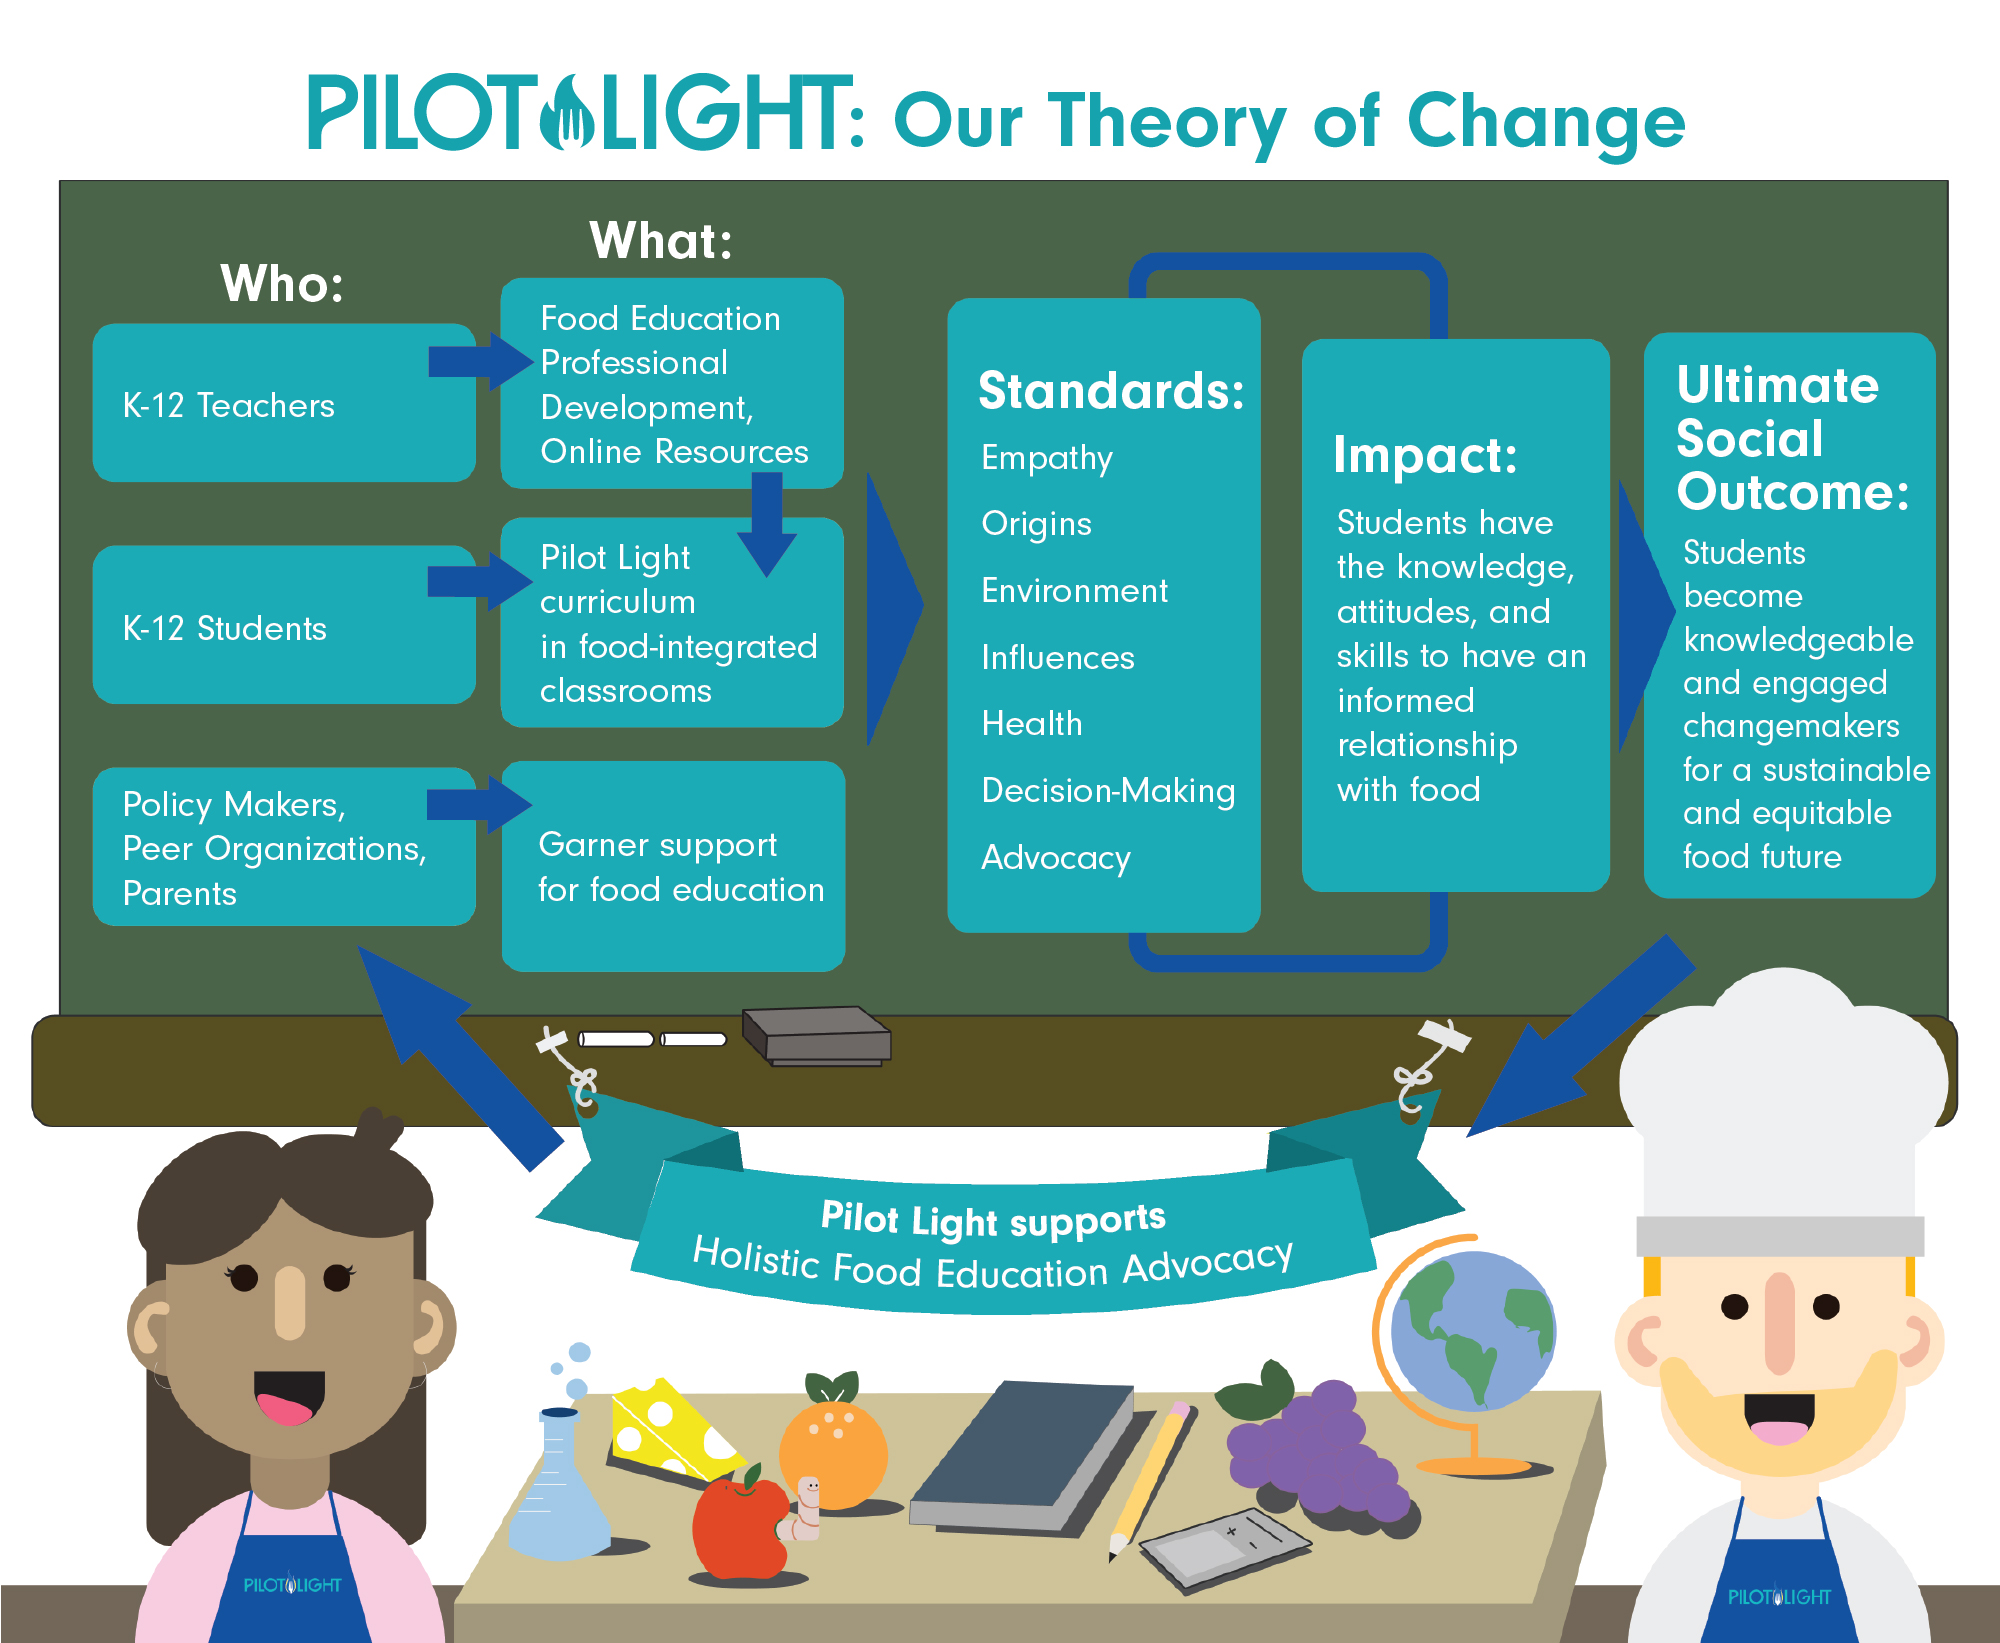 The Theory of Change